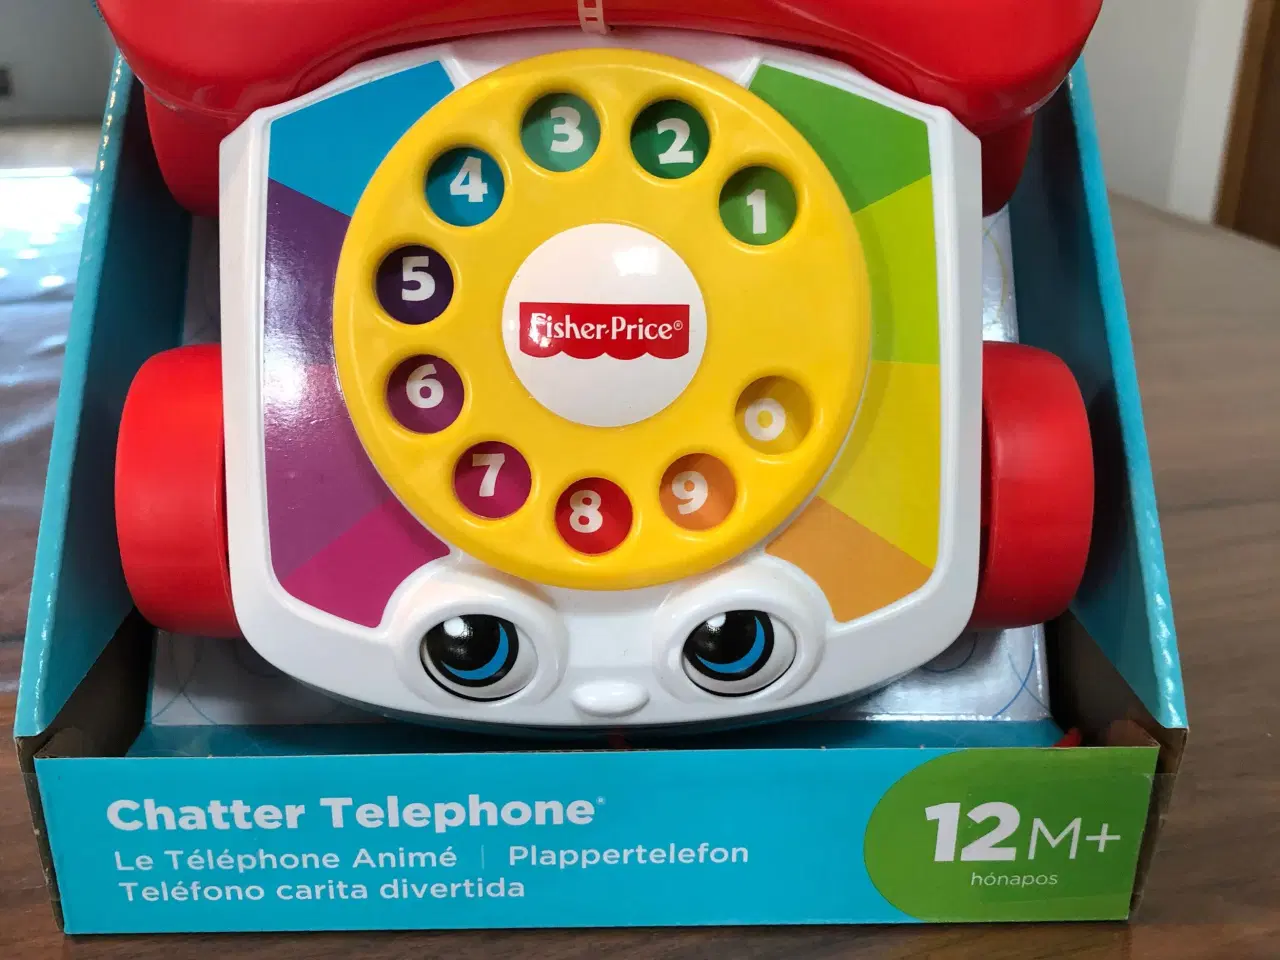 Billede 1 - Fisher Price chatter Telephone 